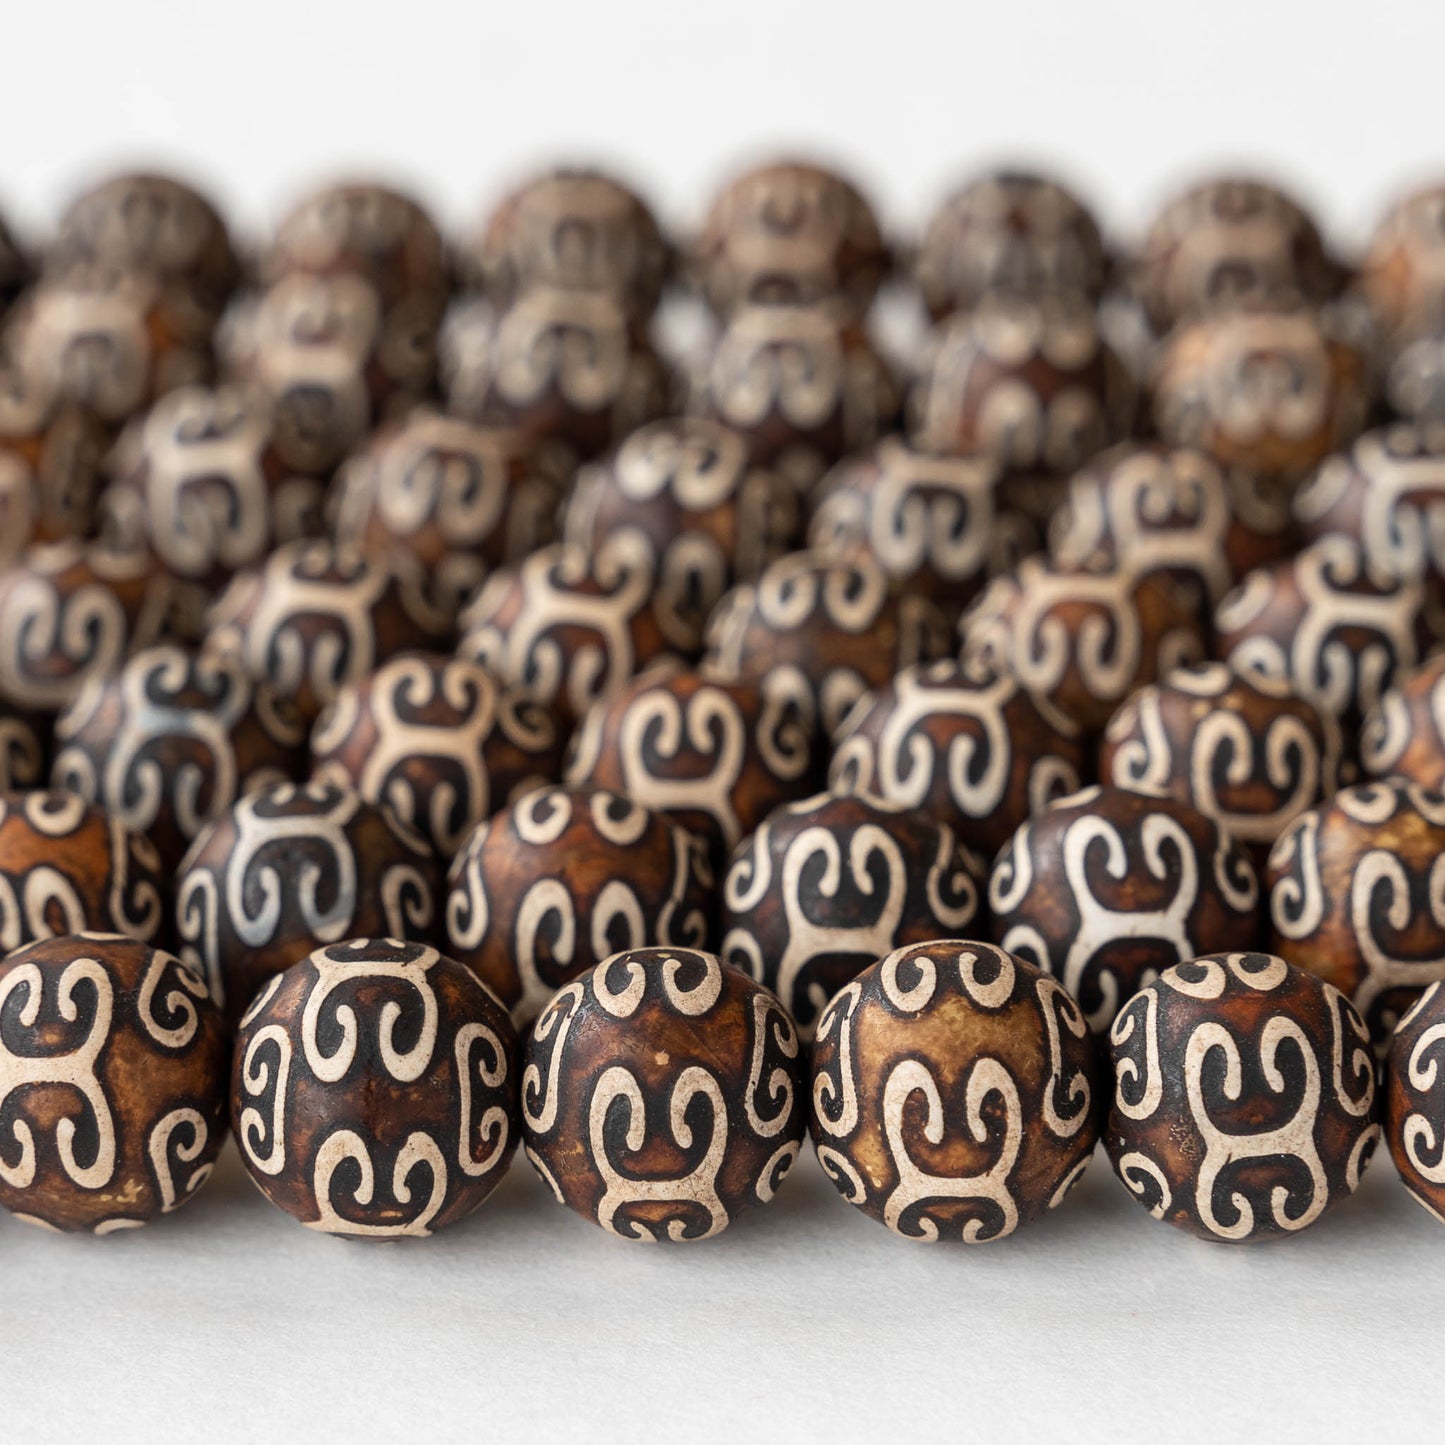 12mm Round Agate Beads - 16 Inch Strand